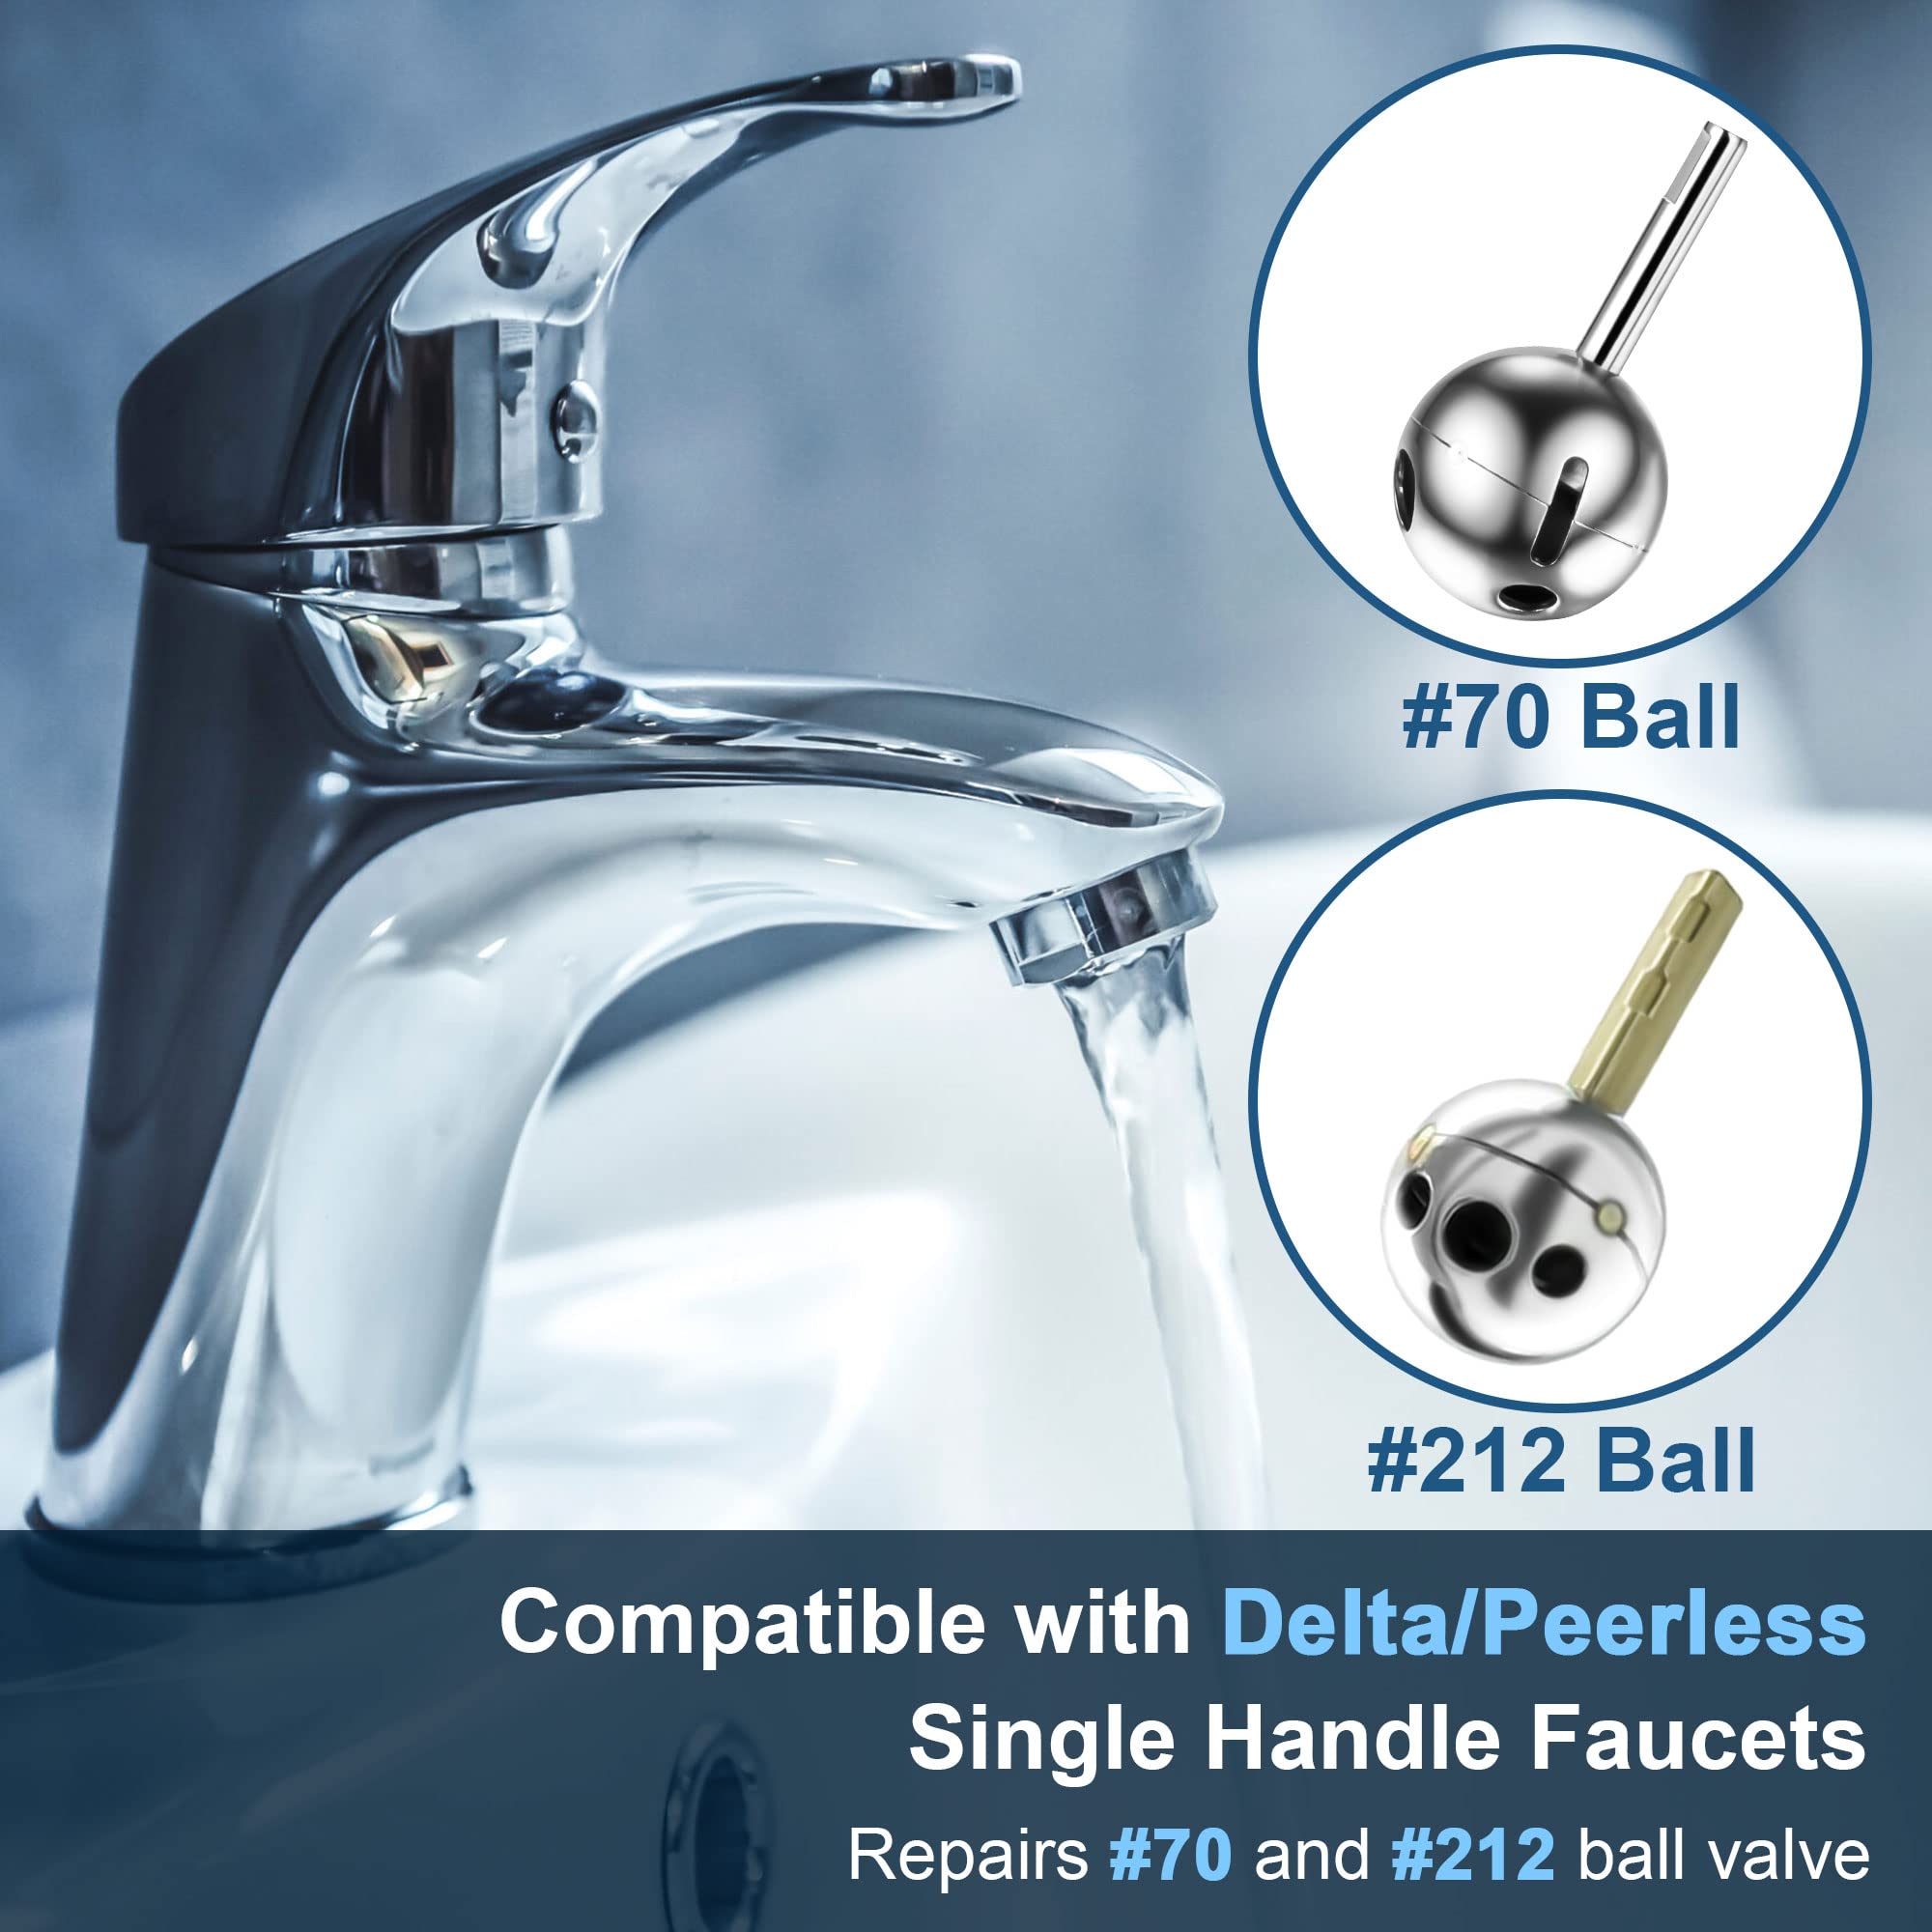 Dreyoo 2 Pack Kitchen Faucet Repair Kit, Compatible with Delta/Peerless Faucet RP3614 Single Handle Faucets #70 and #212 Ball Faucets, Faucet Replacement Parts, Stainless Steel